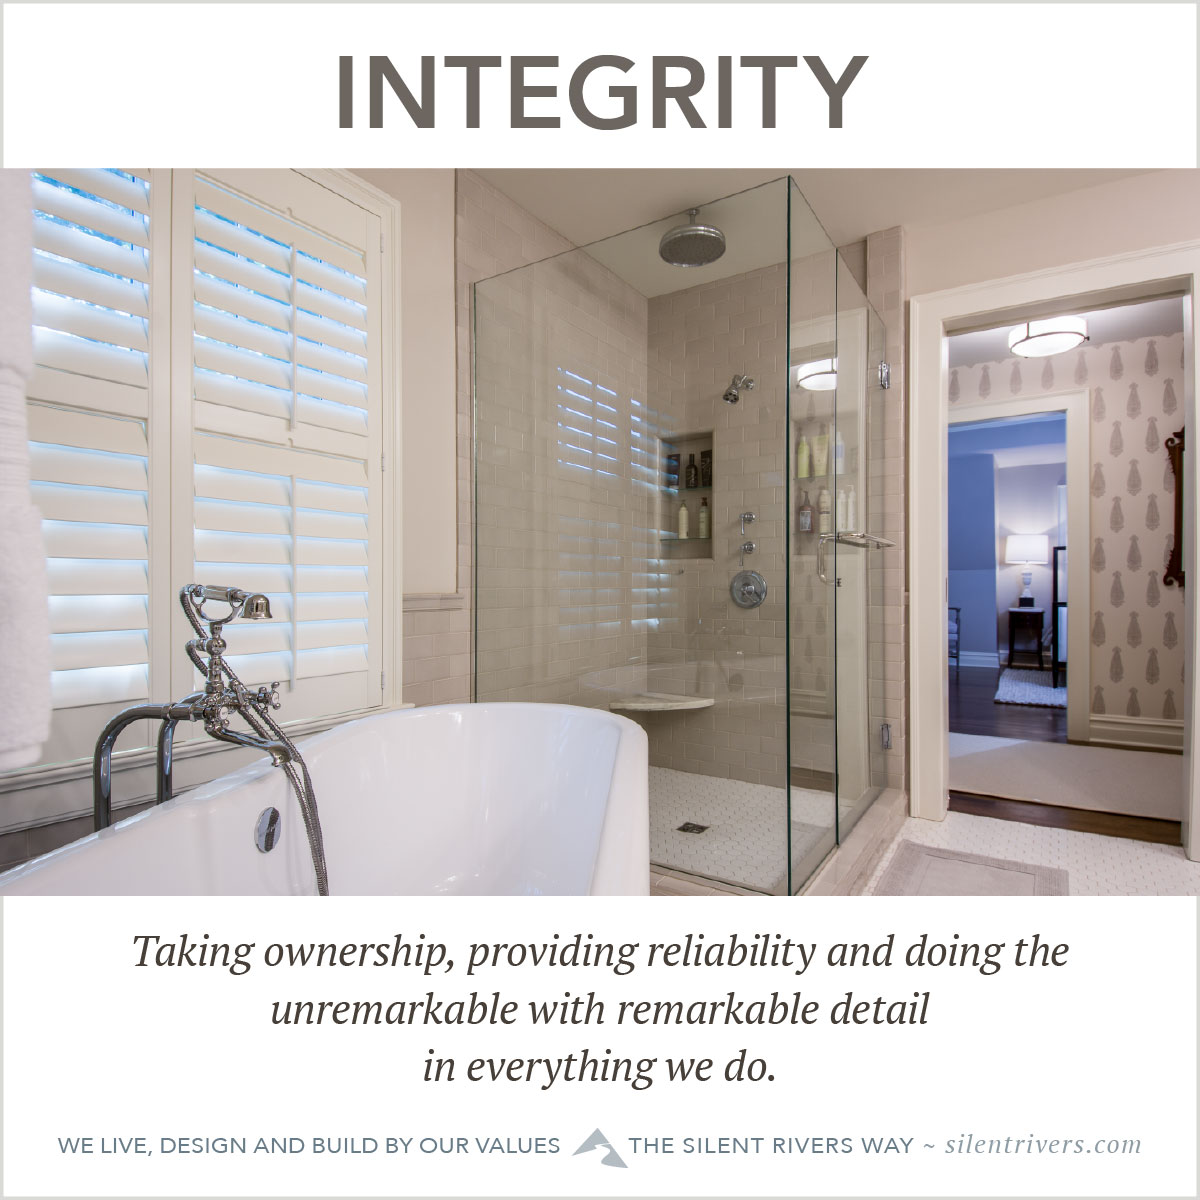 Silent Rivers values Integrity, which we define as "Taking ownership, providing reliability and doing the unremarkable with remarkable detail in everything we do."